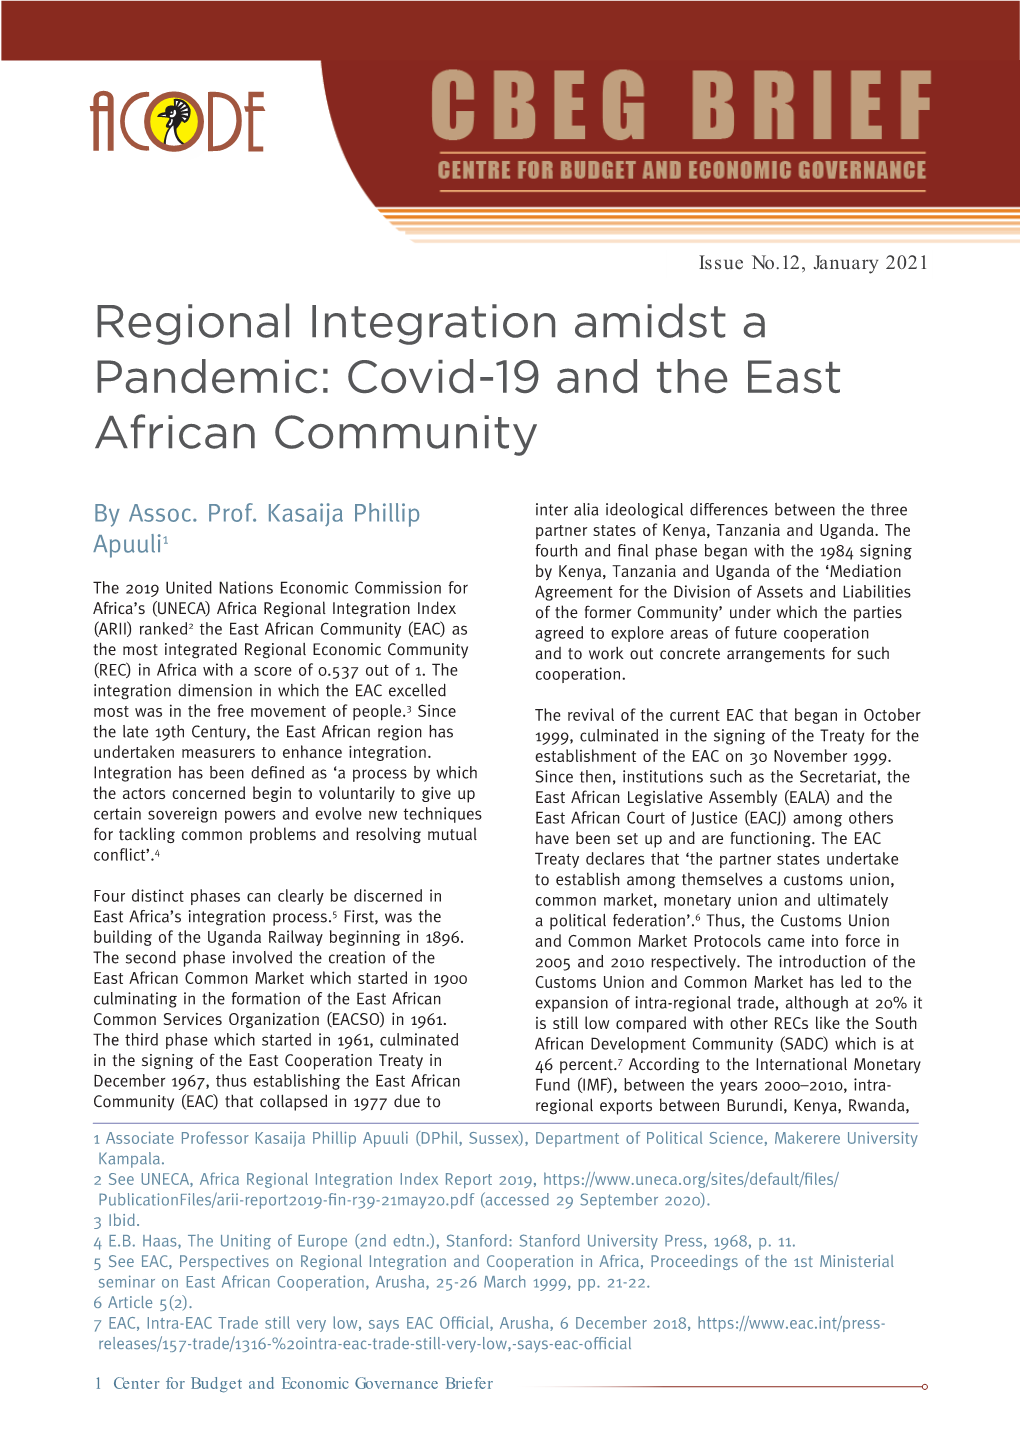 Covid-19 and the East African Community